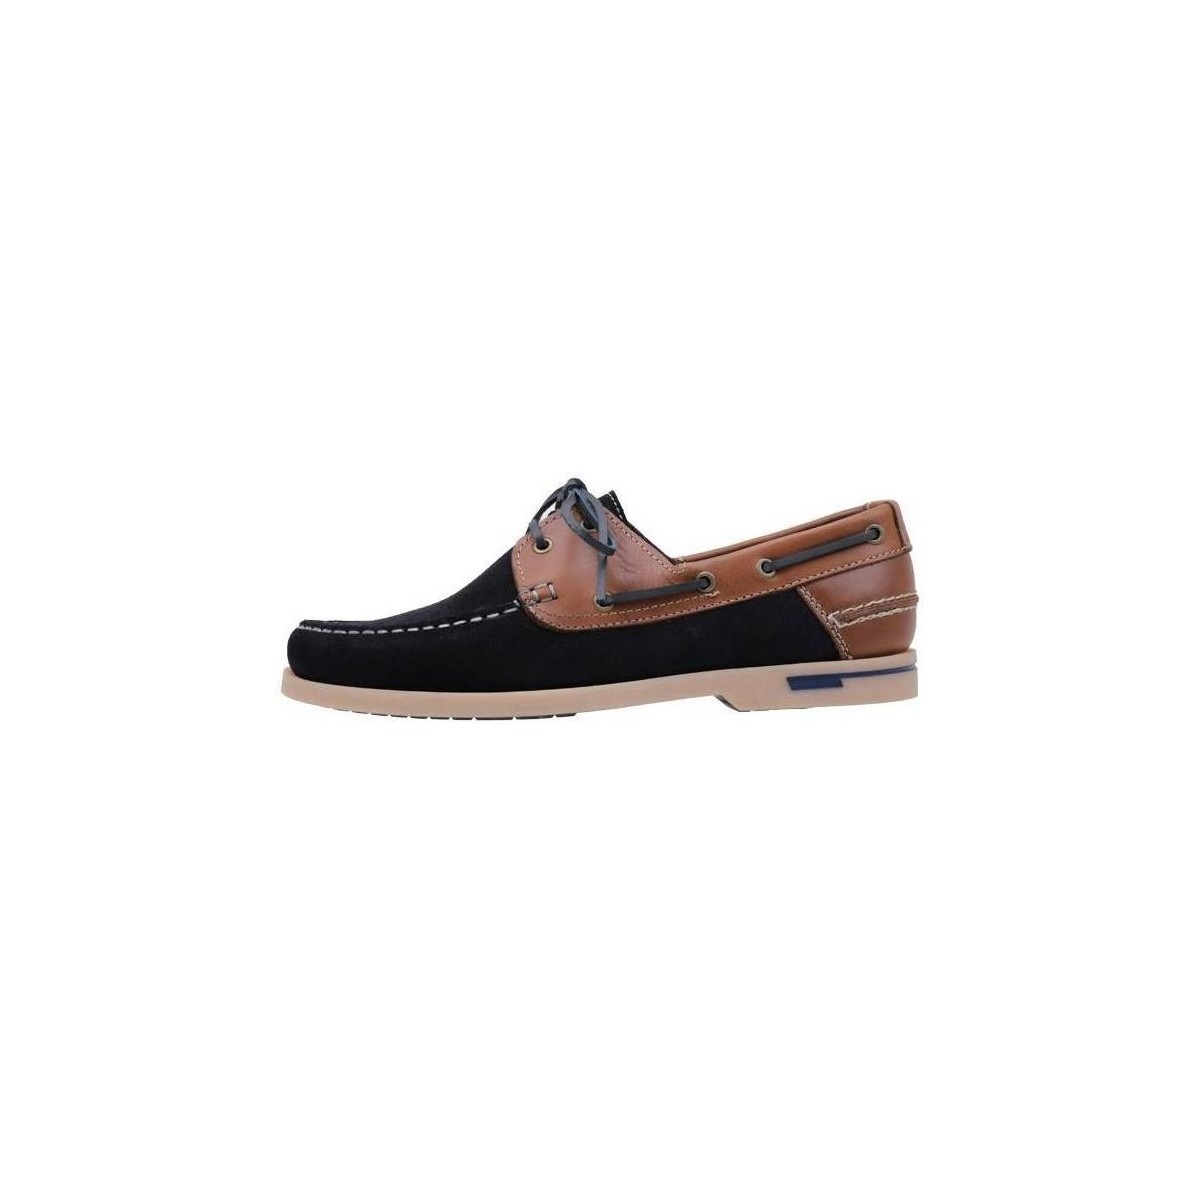 Spartoo Gents Blue Boat Shoes from Krack GOOFASH